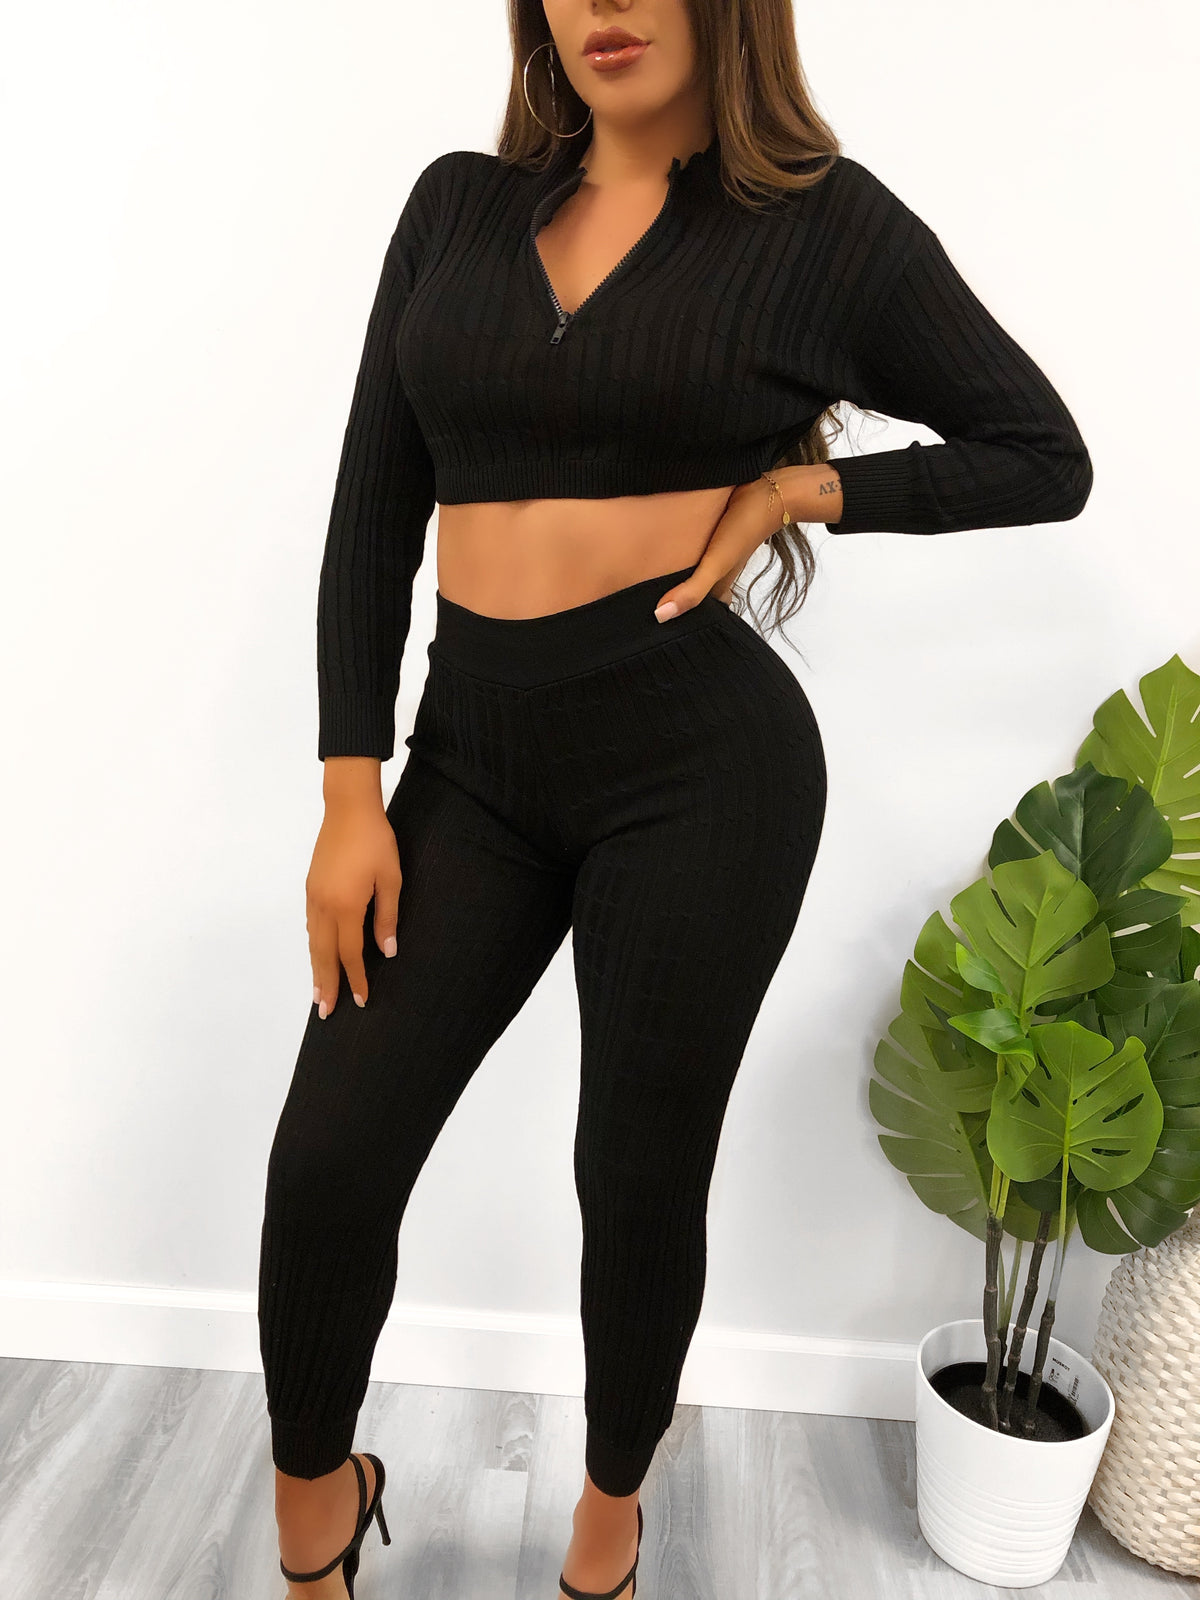 black ribbed 2 piece, high waist leggings, crop top, front zipper, tight fitting